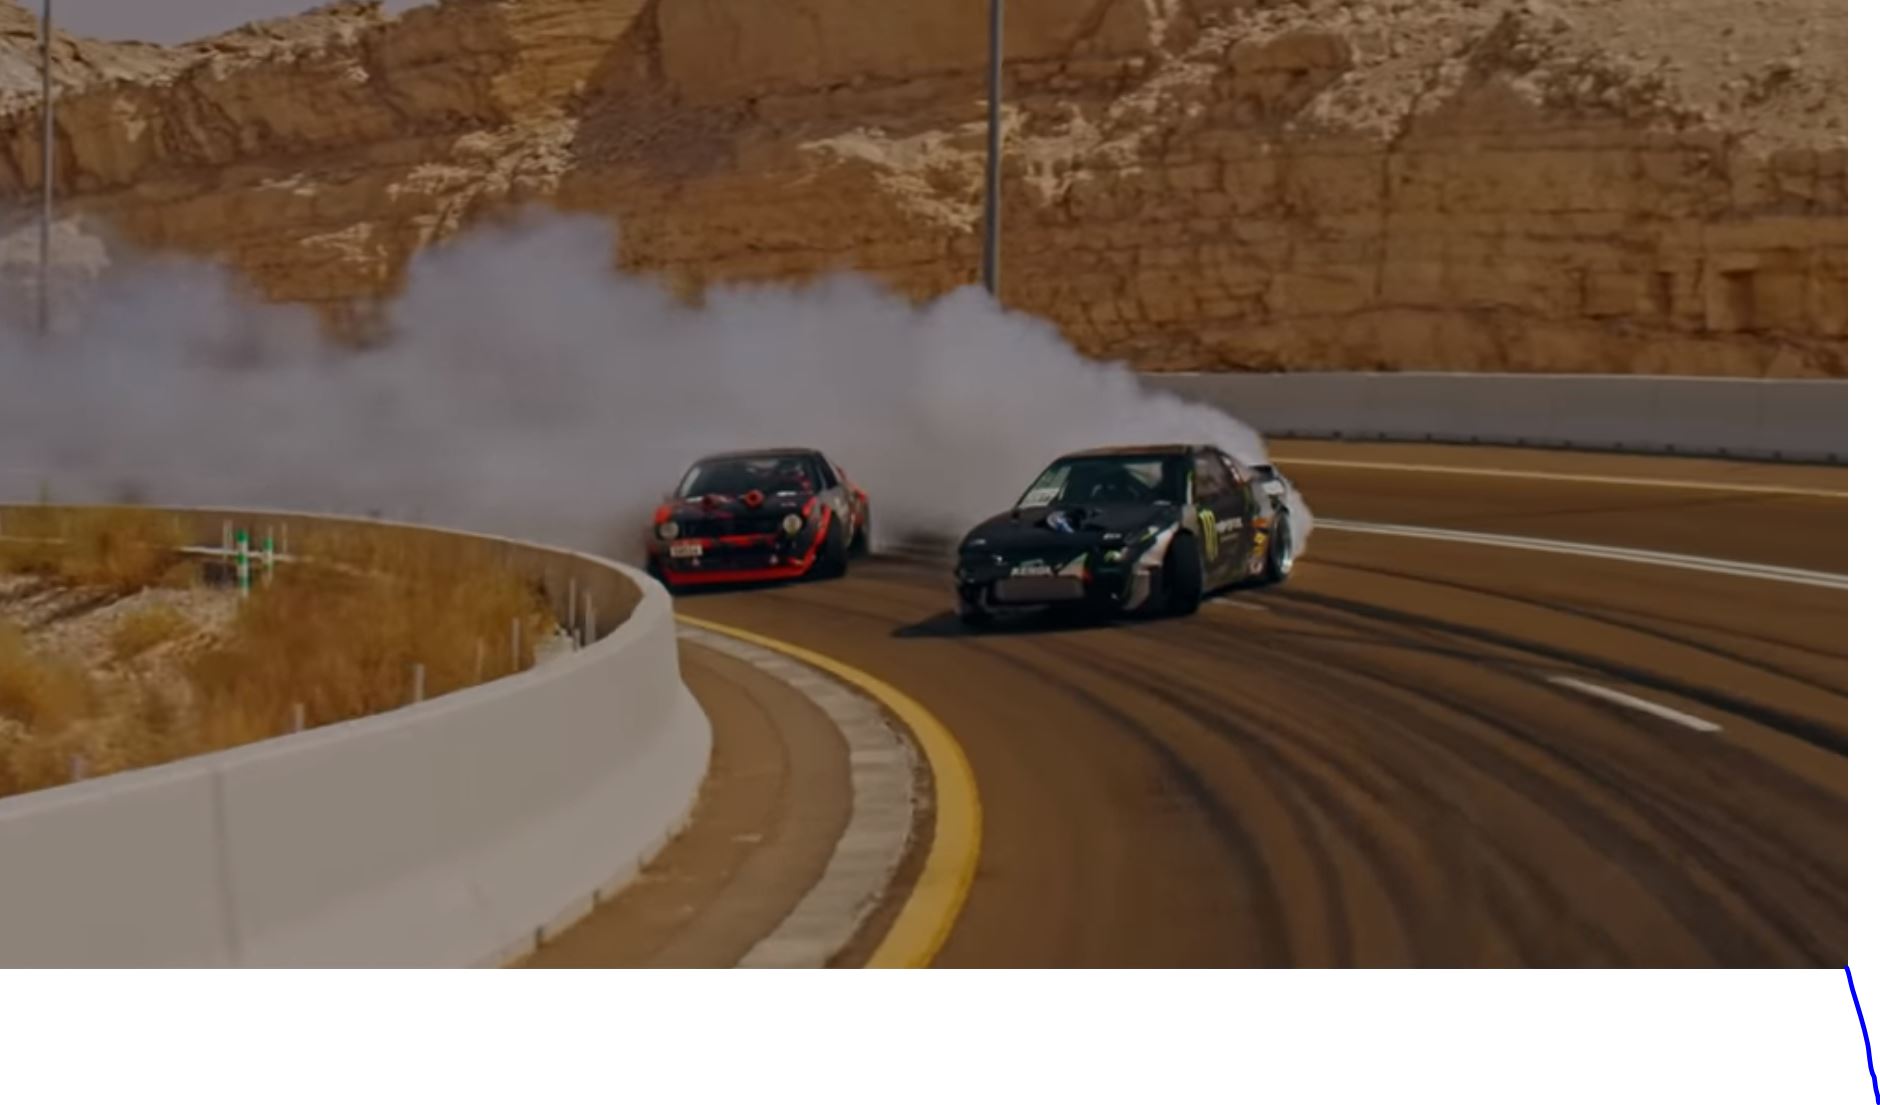 Lunatics By Nature: This Monster Energy Video Is A Must Watch In Bad Assery